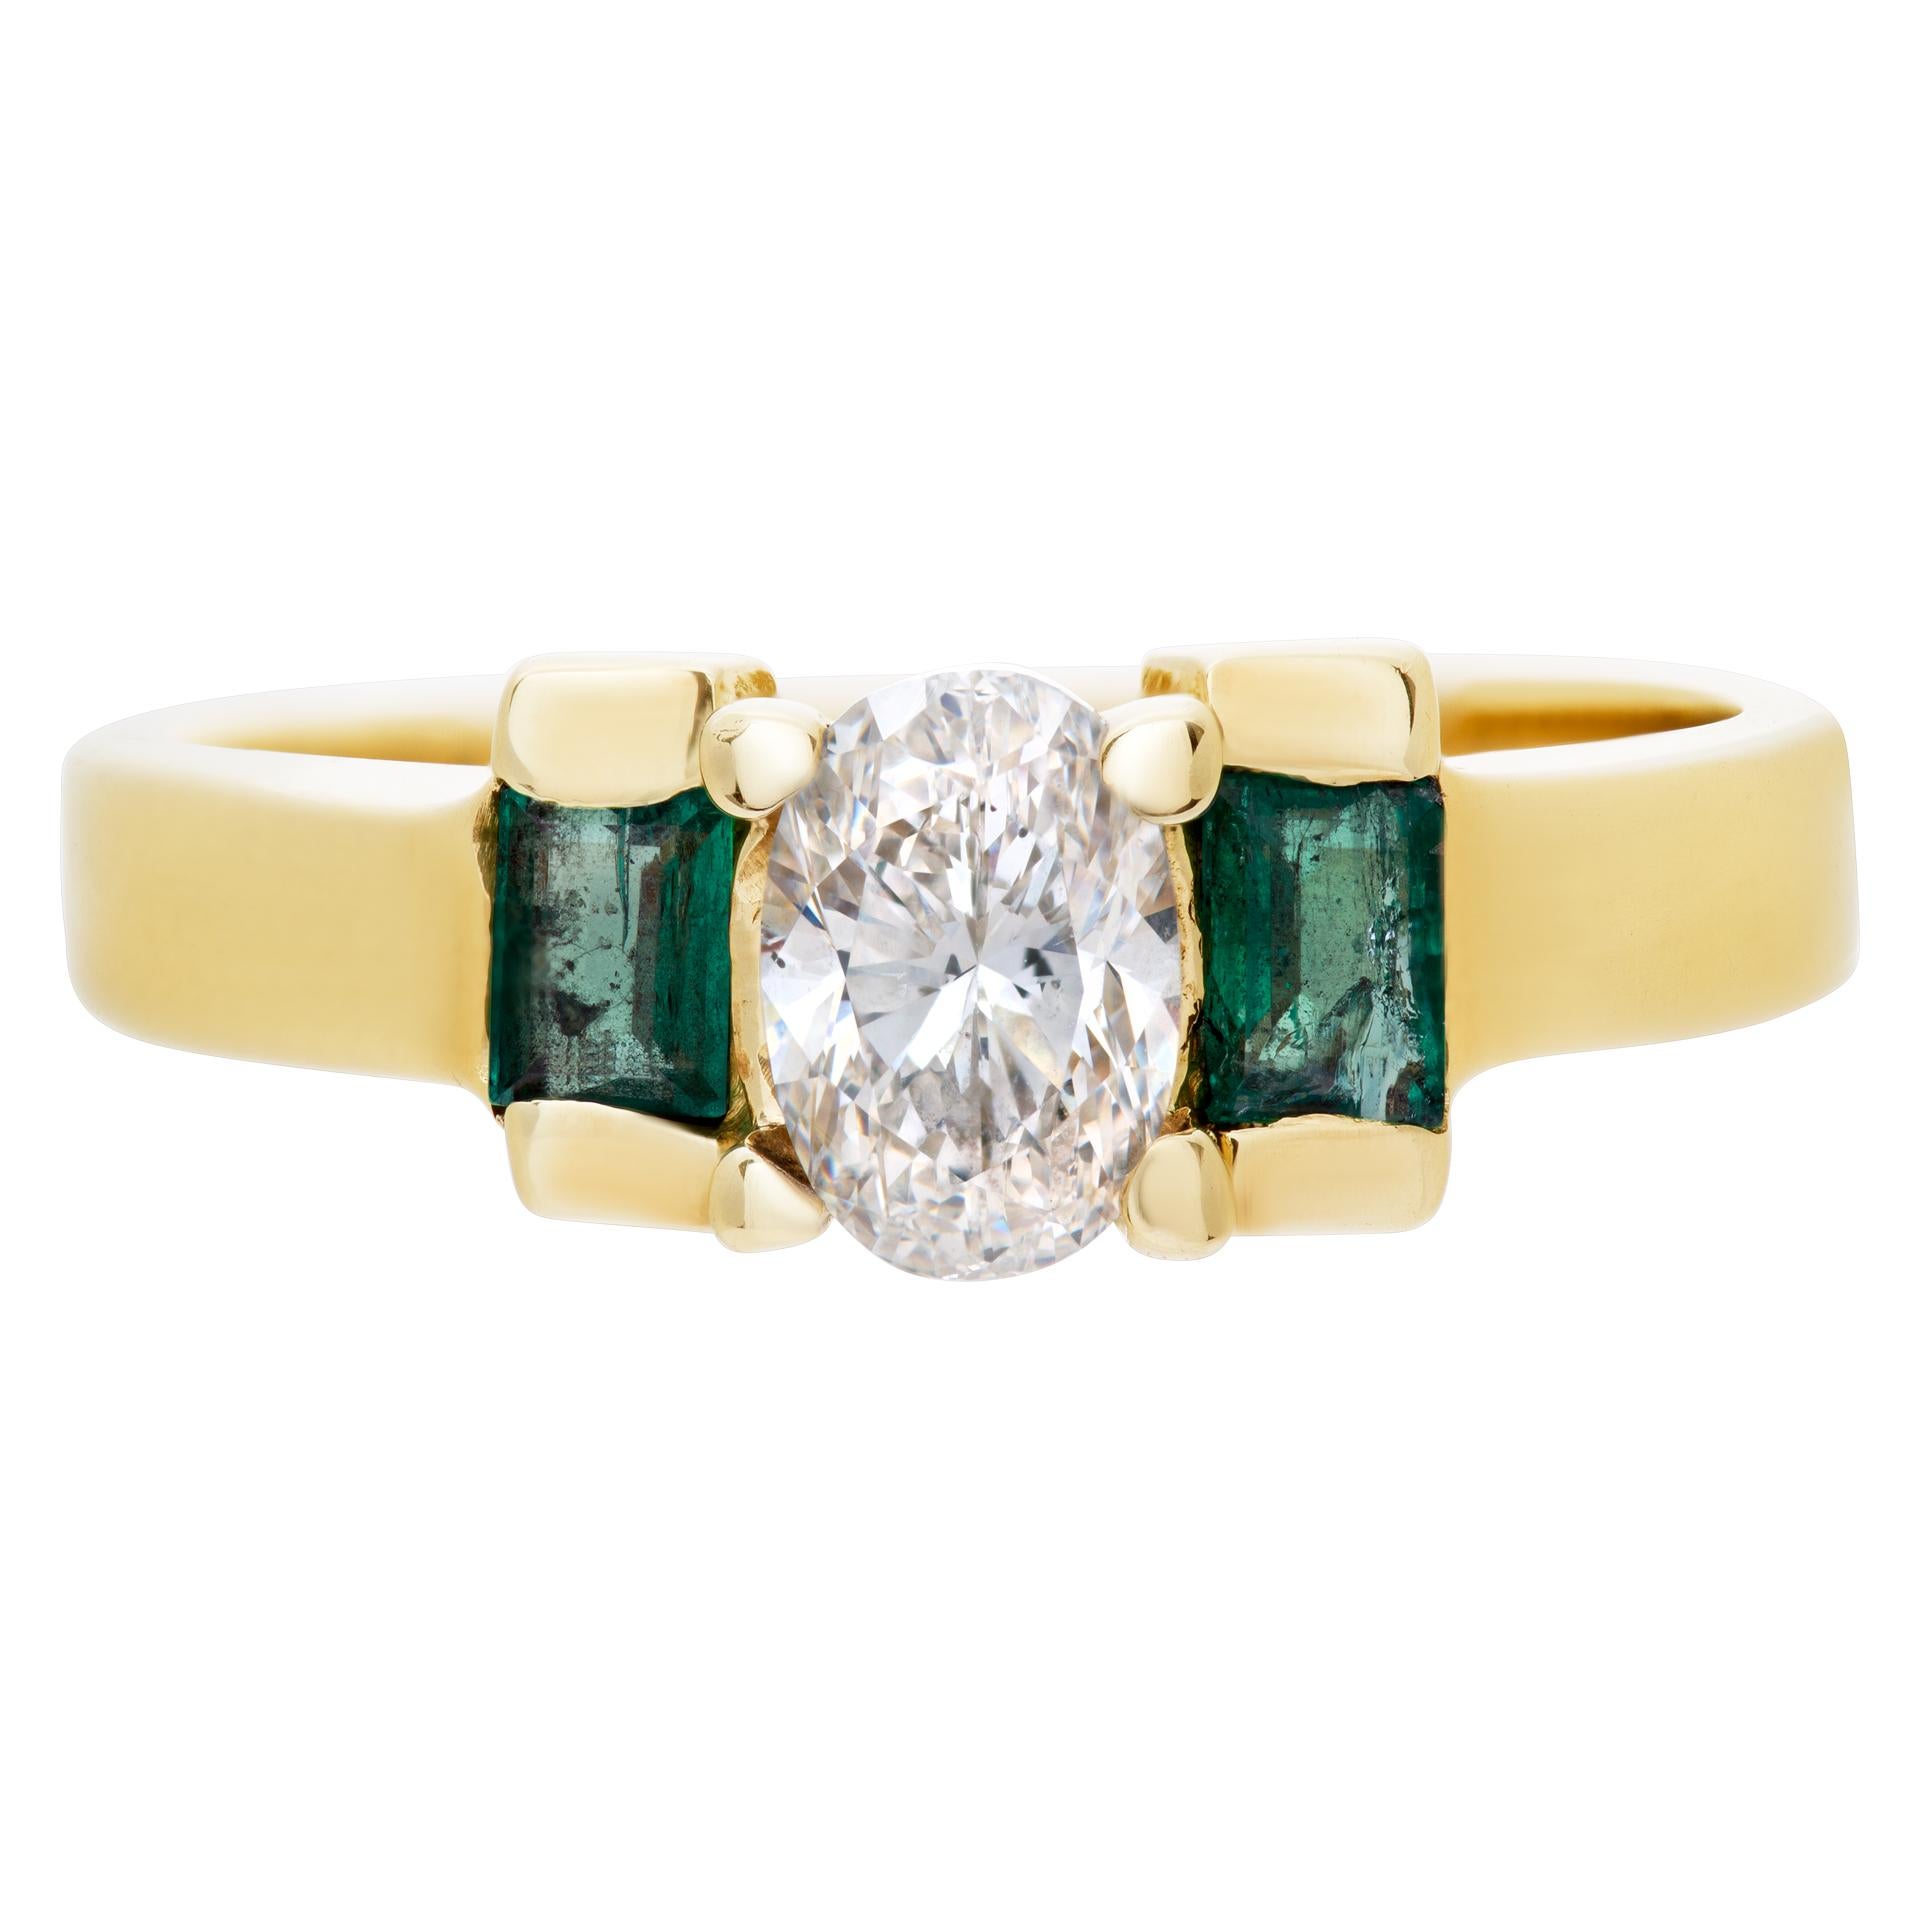 Adorable diamond and emerald ring in 14k gold with an app. 0.50 ct oval diamond center (H-I, VS2). Size 6.5

This Emerald ring is currently size 6.5 and some items can be sized up or down, please ask! It weighs 2.7 pennyweights and is 14k.
